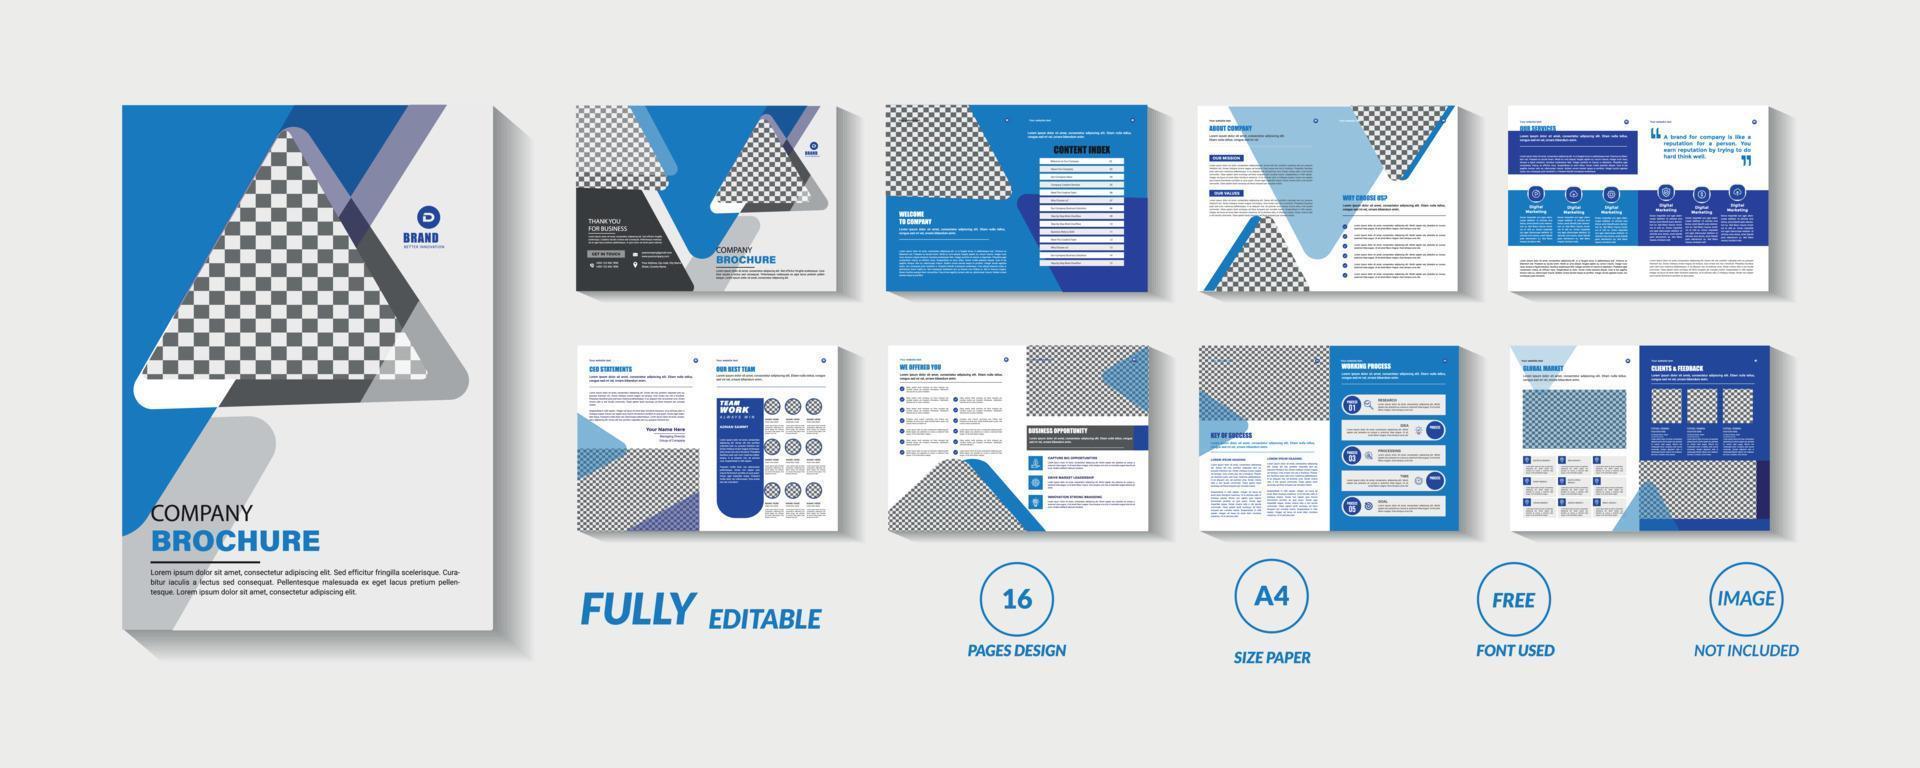 Blue and black 16 page company brochure template vector